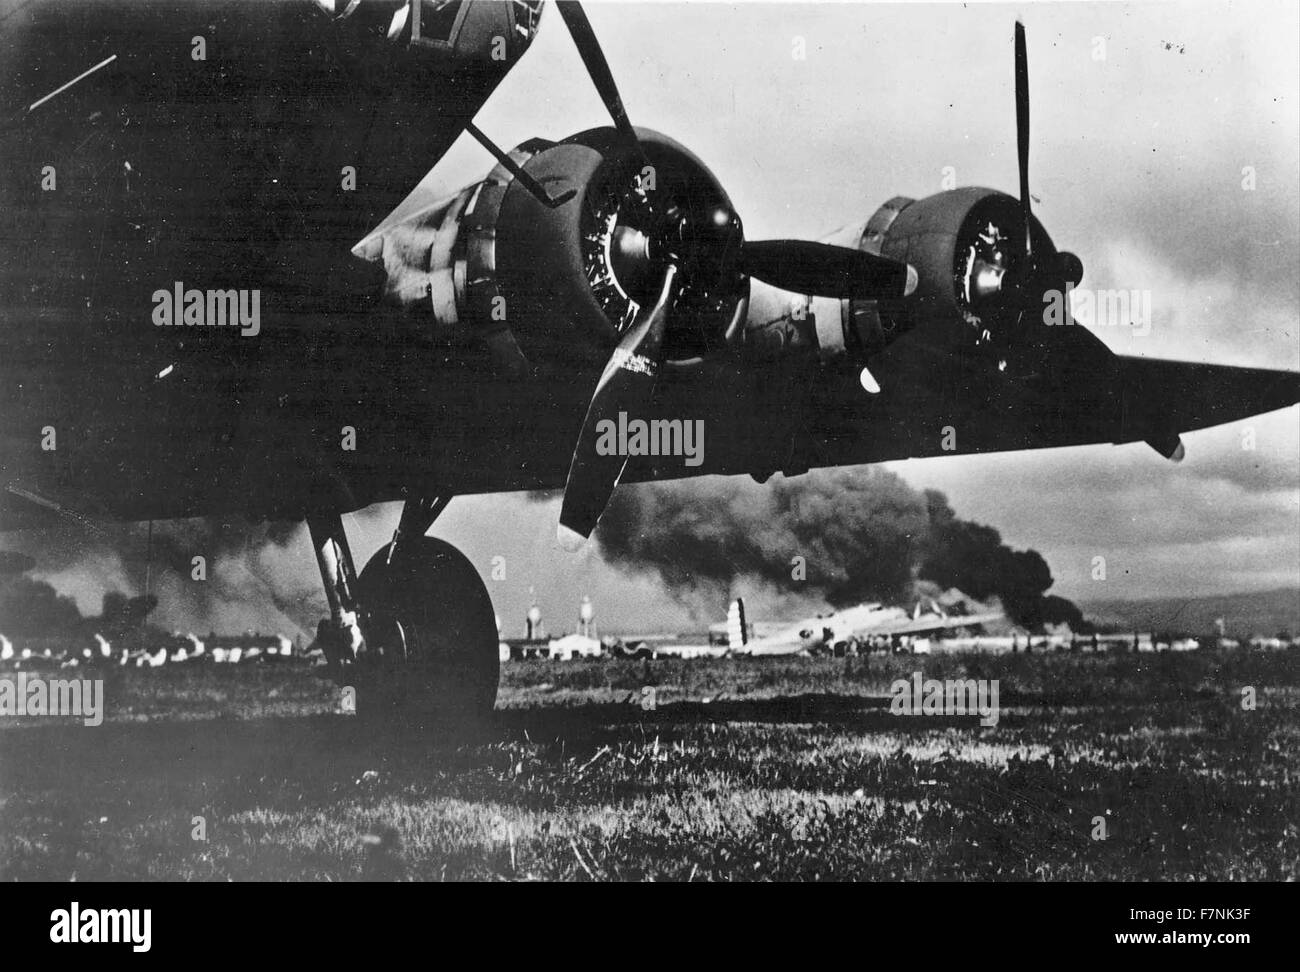 US Army B-17E aircraft, at Hickam Air Field, after landing safely. When the Imperial Japanese Navy attacked Oahu's military installations on 7 December 1941, their planes bombed and strafed Hickam to eliminate air opposition. Hickam suffered extensive damage and aircraft losses, with 189 people killed and 303 wounded. Stock Photo